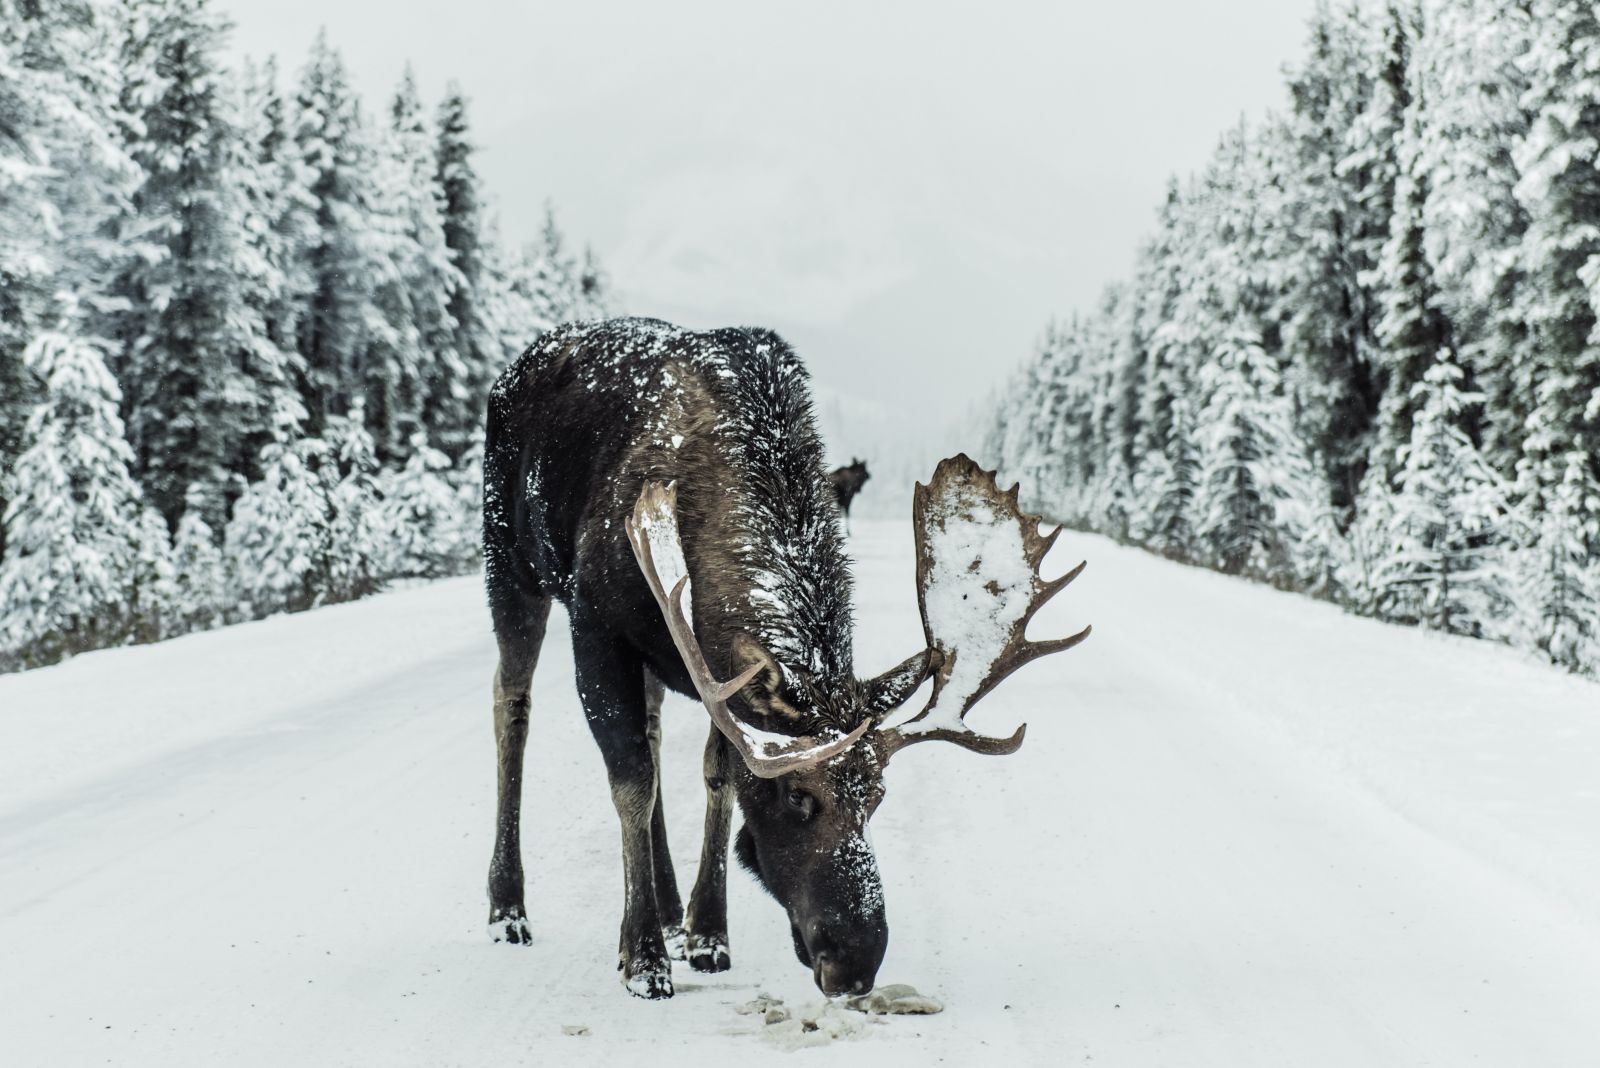 Image of a moose in the snow by Ivars Krutainis